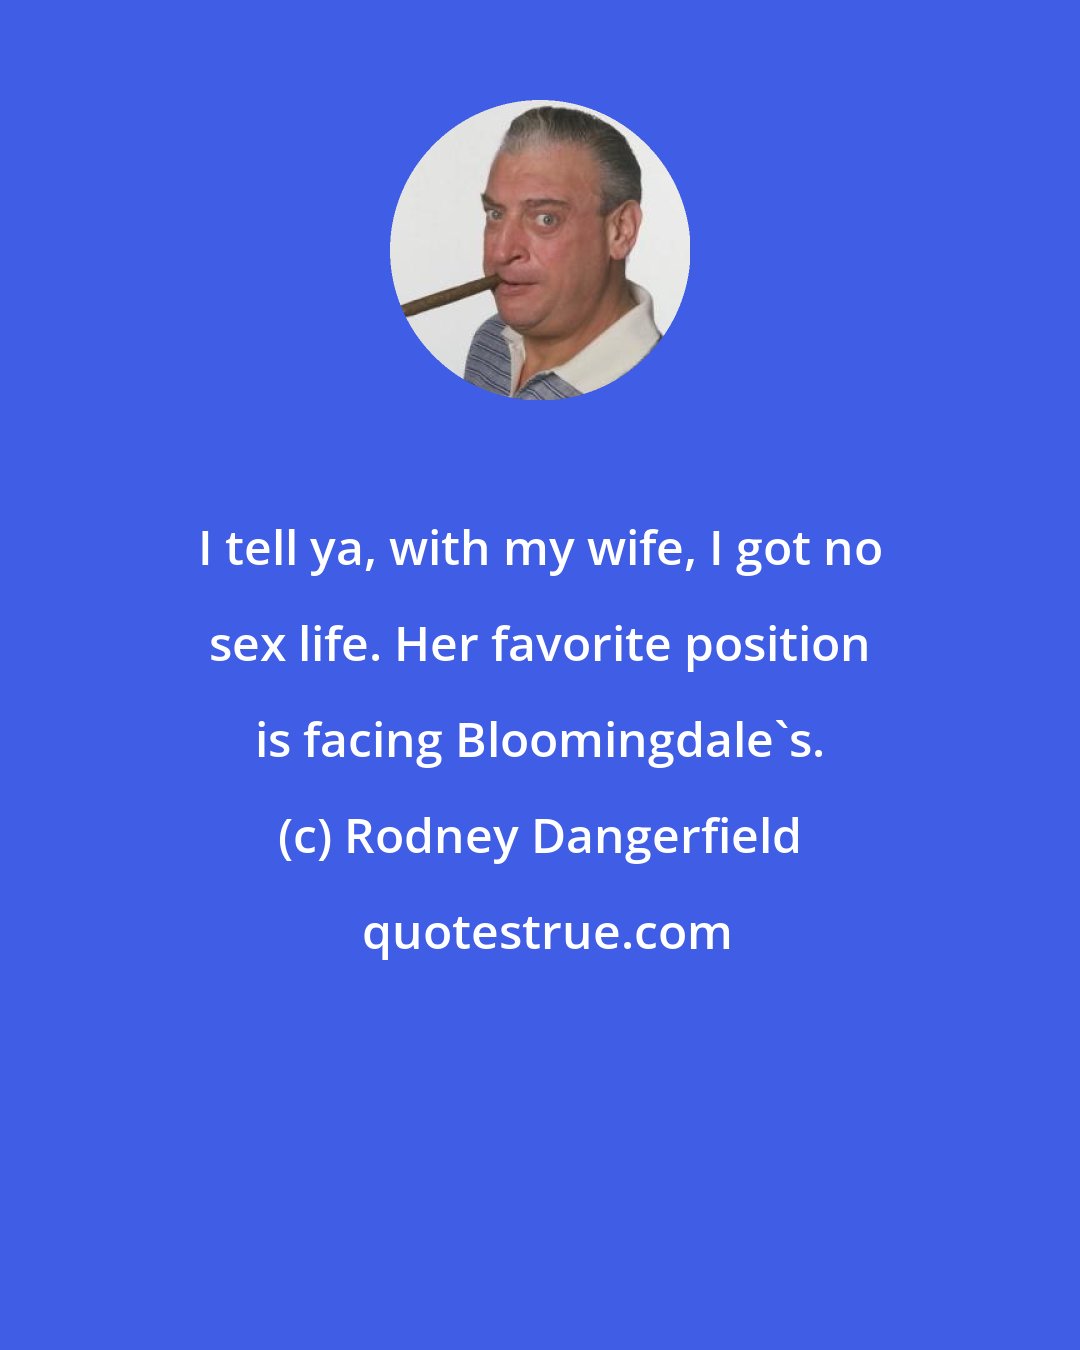 Rodney Dangerfield: I tell ya, with my wife, I got no sex life. Her favorite position is facing Bloomingdale's.